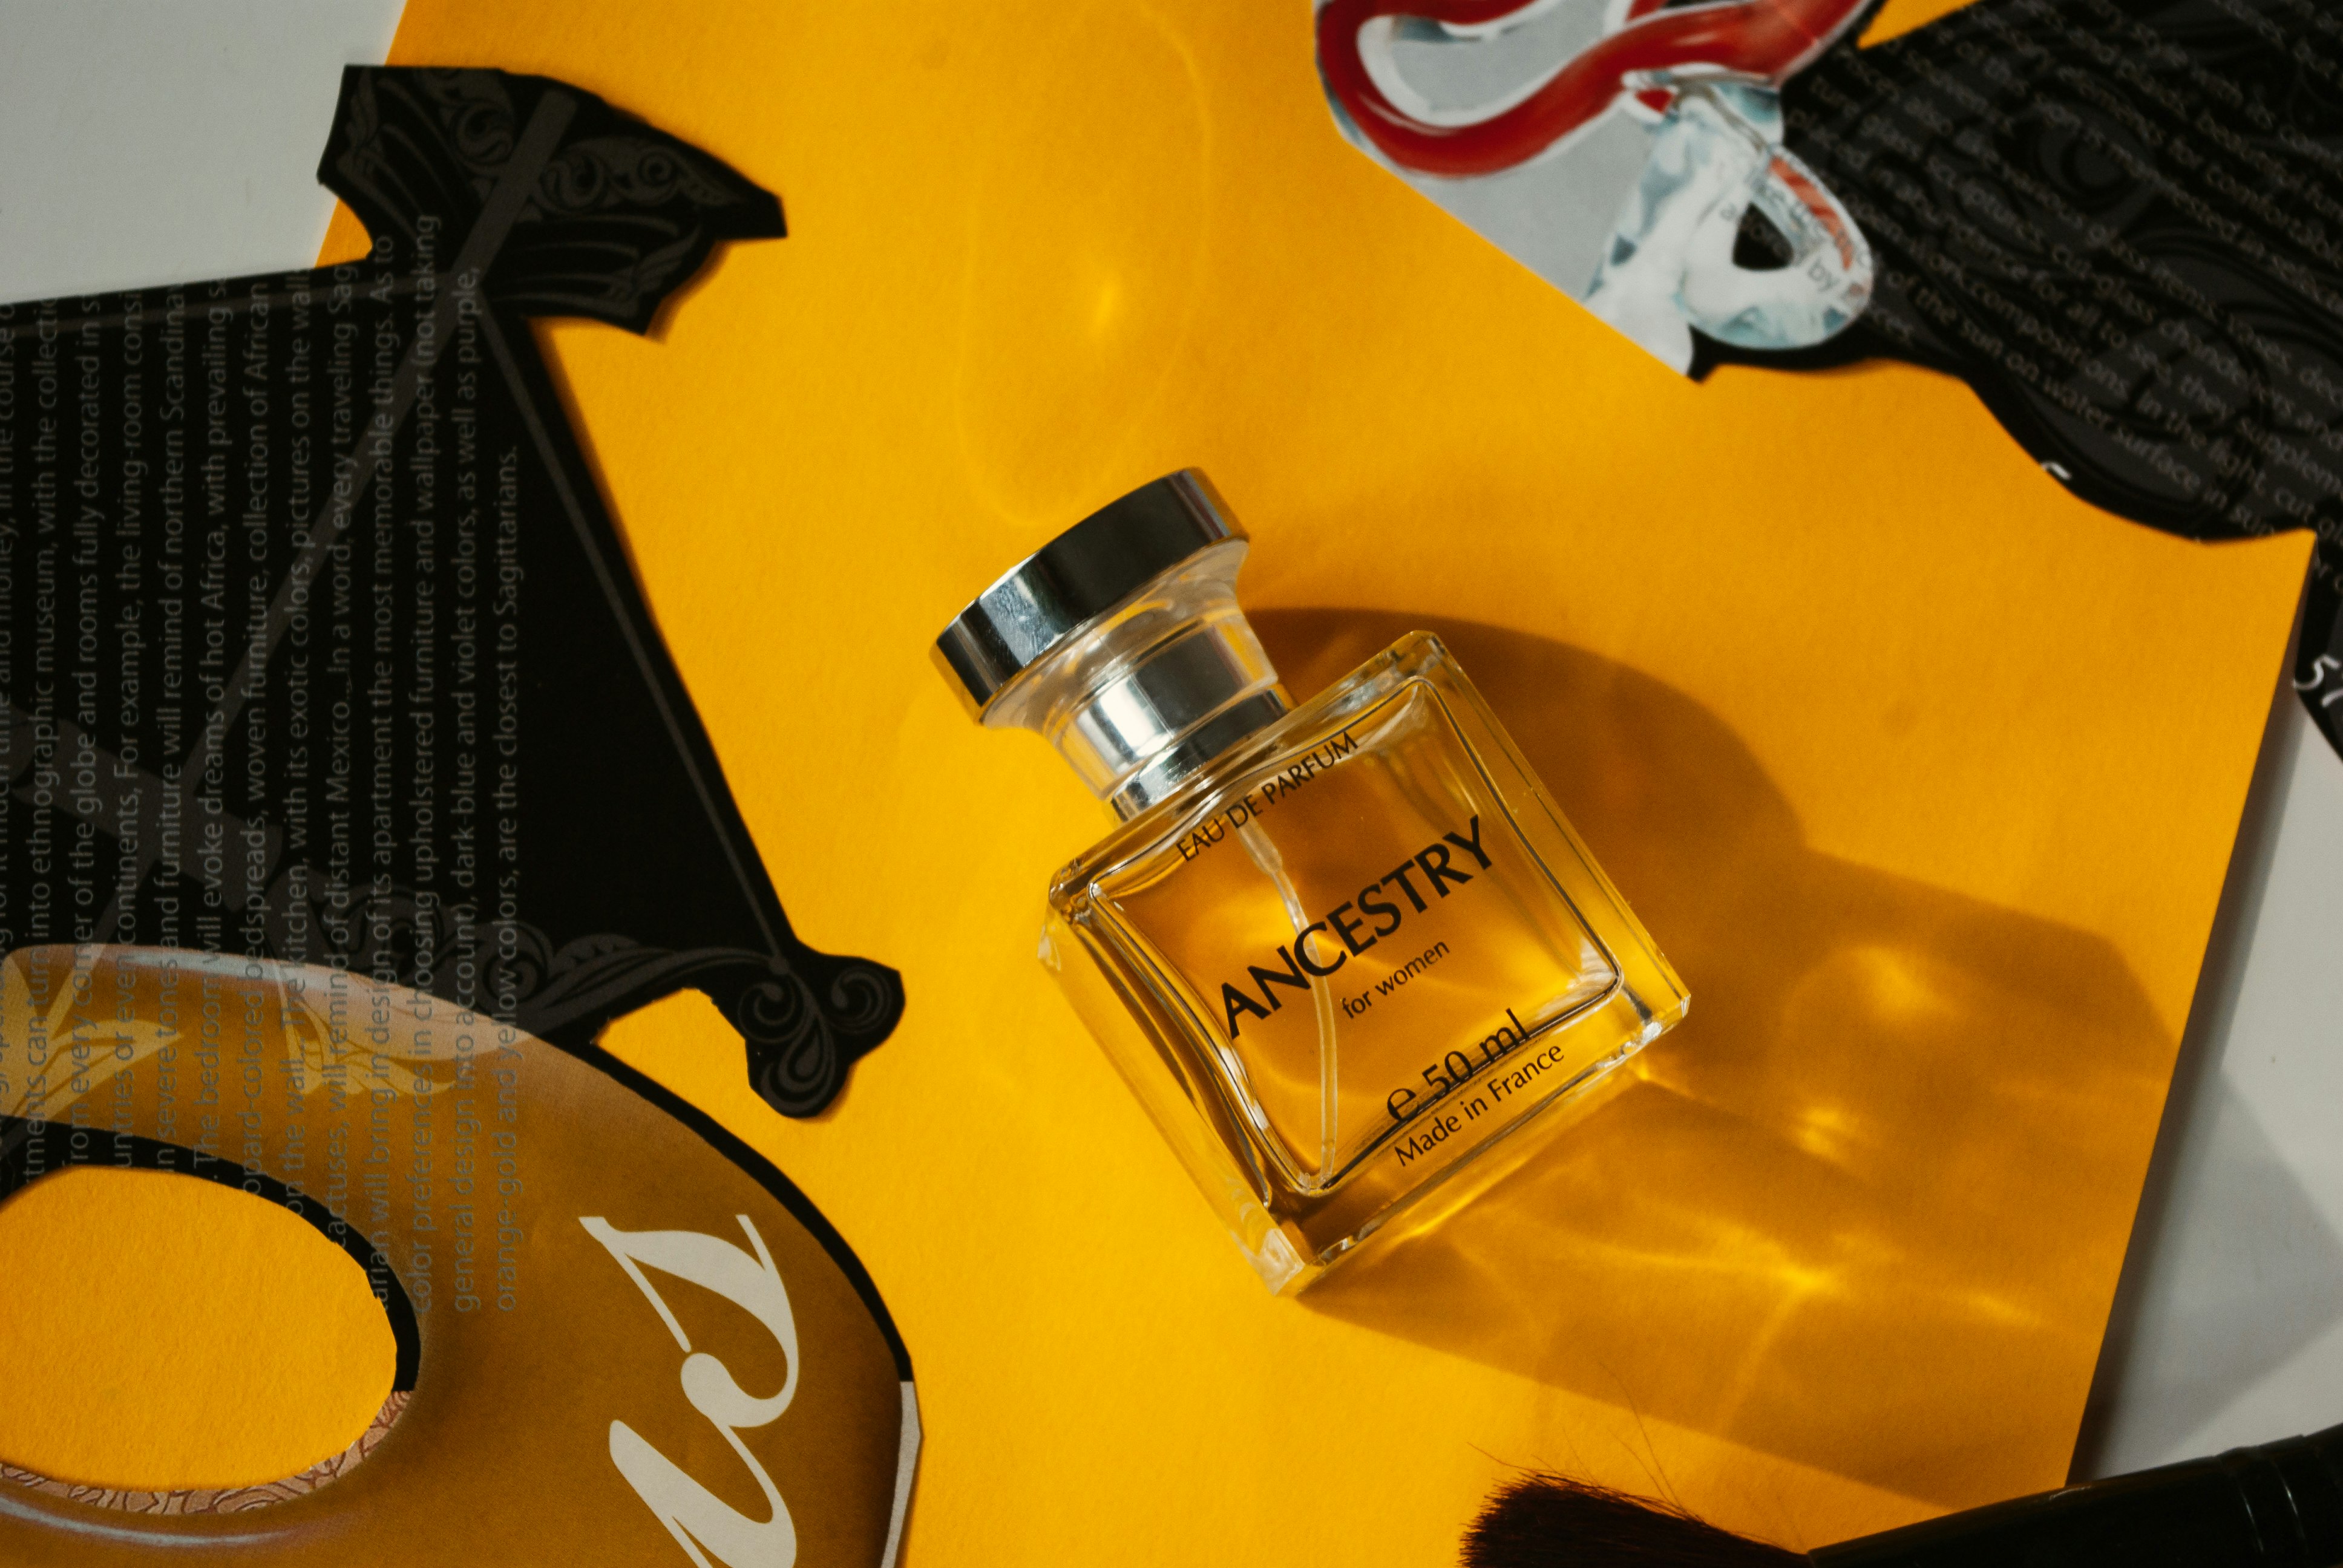 clear glass perfume bottle on yellow surface